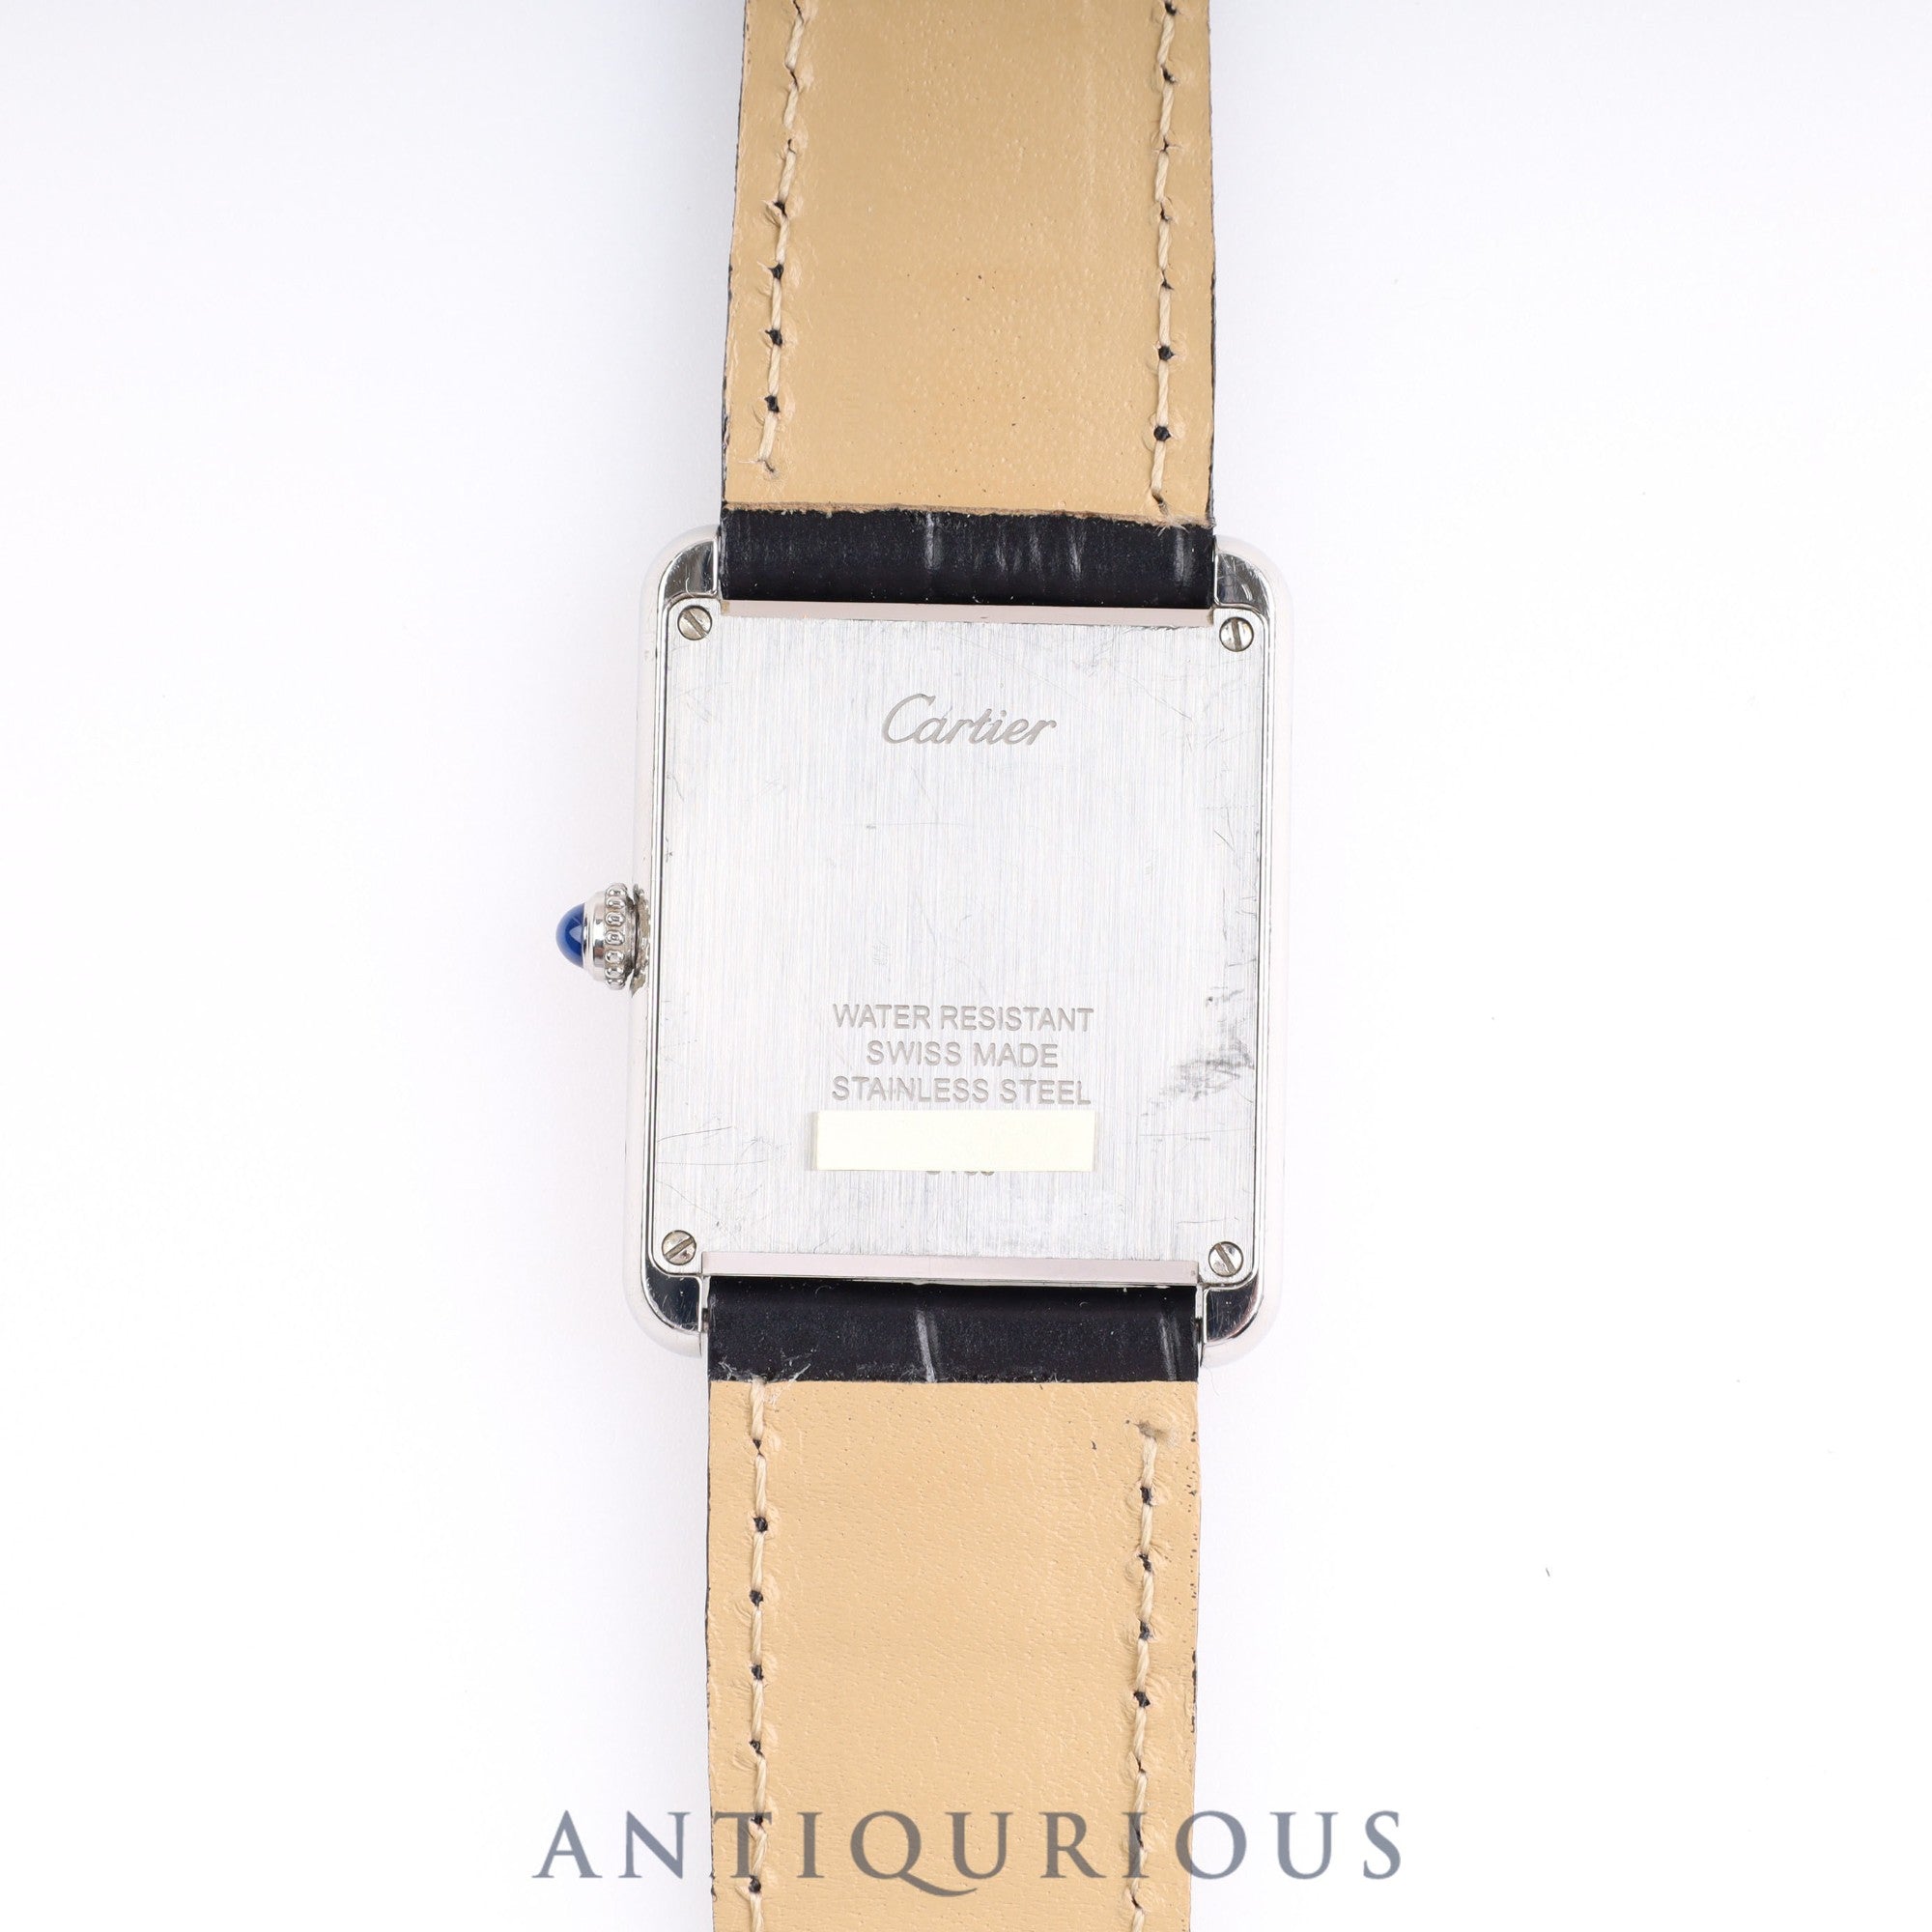 CARTIER Tank Solo LM QZ W5200003 / 3169 Silver Dial SS Leather Box Warranty Card